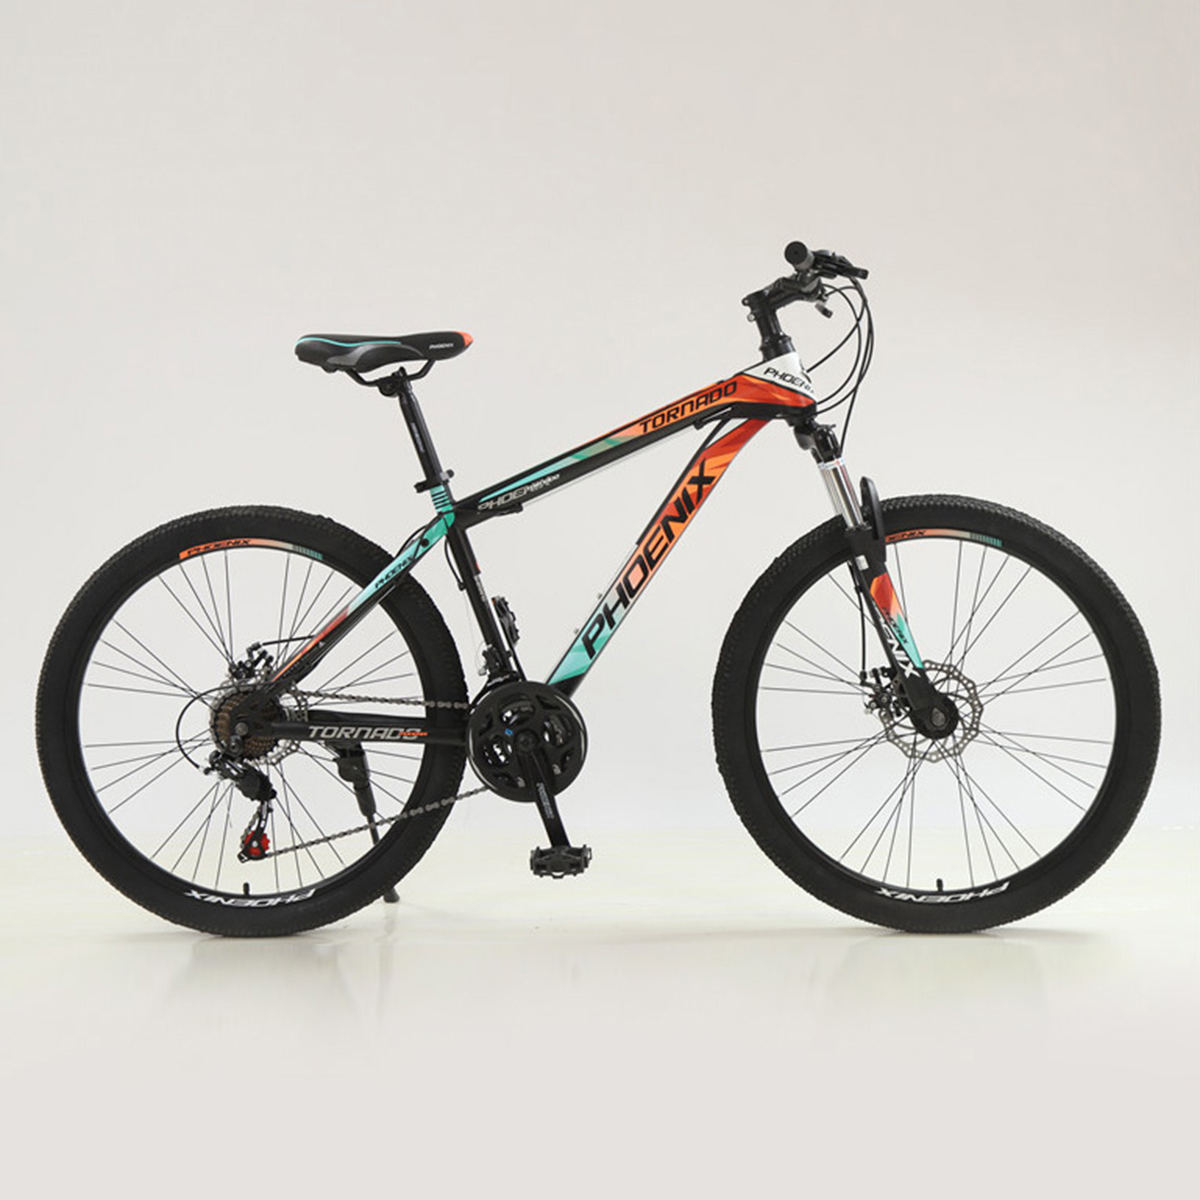 Cycle Price In Bangladesh - Buy Bicycle Online from Daraz.com.bd